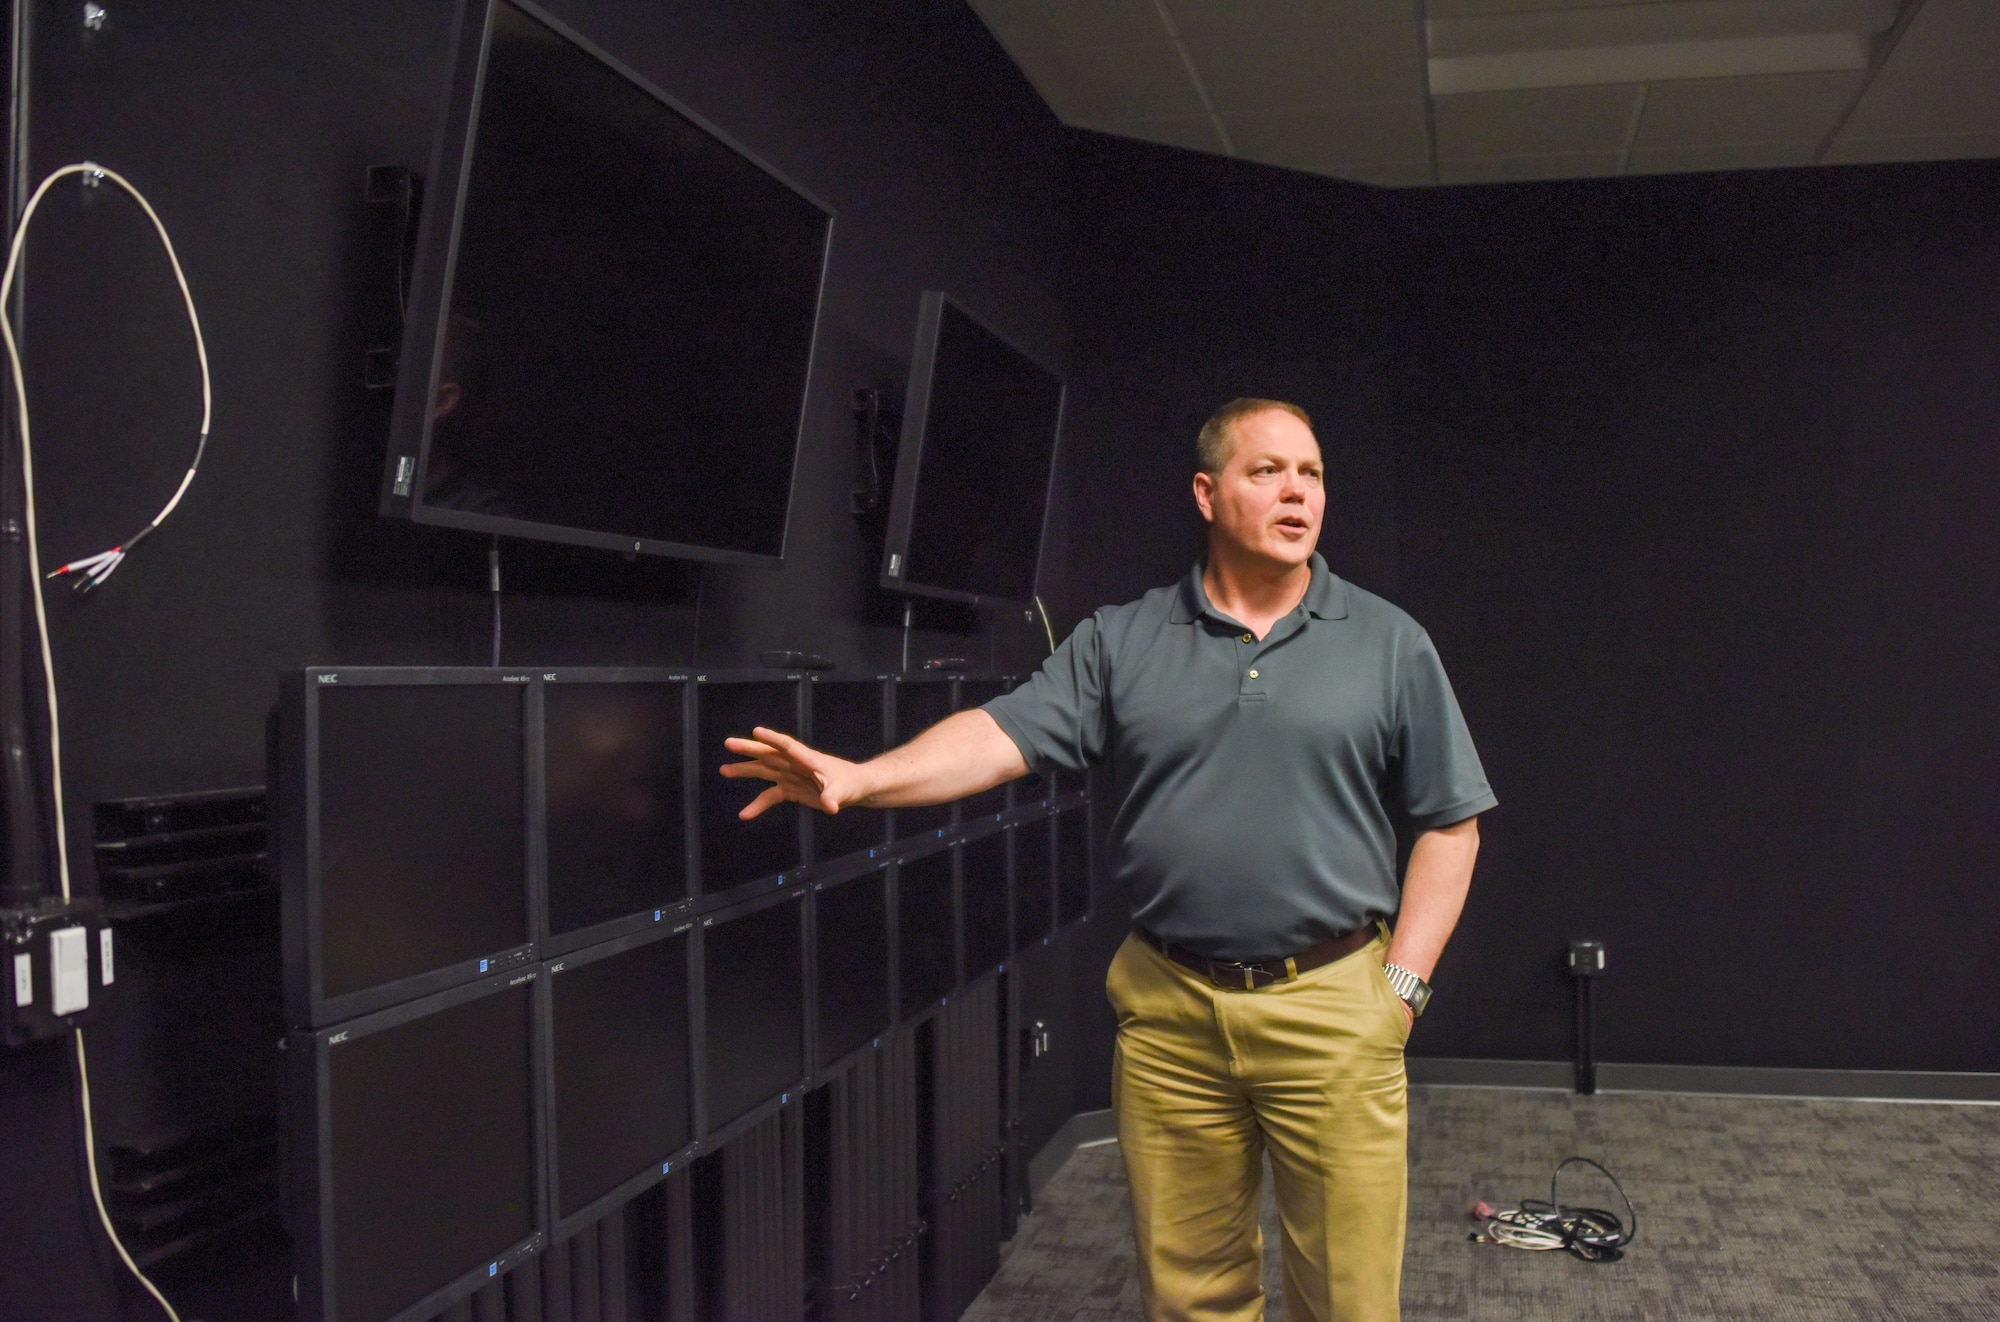 Nathan Hill, the Lockheed Martin F-35 Training Systems Manager for the simulators at Hill Air Force Base, Utah, showcases multiple display screens in a debrief room